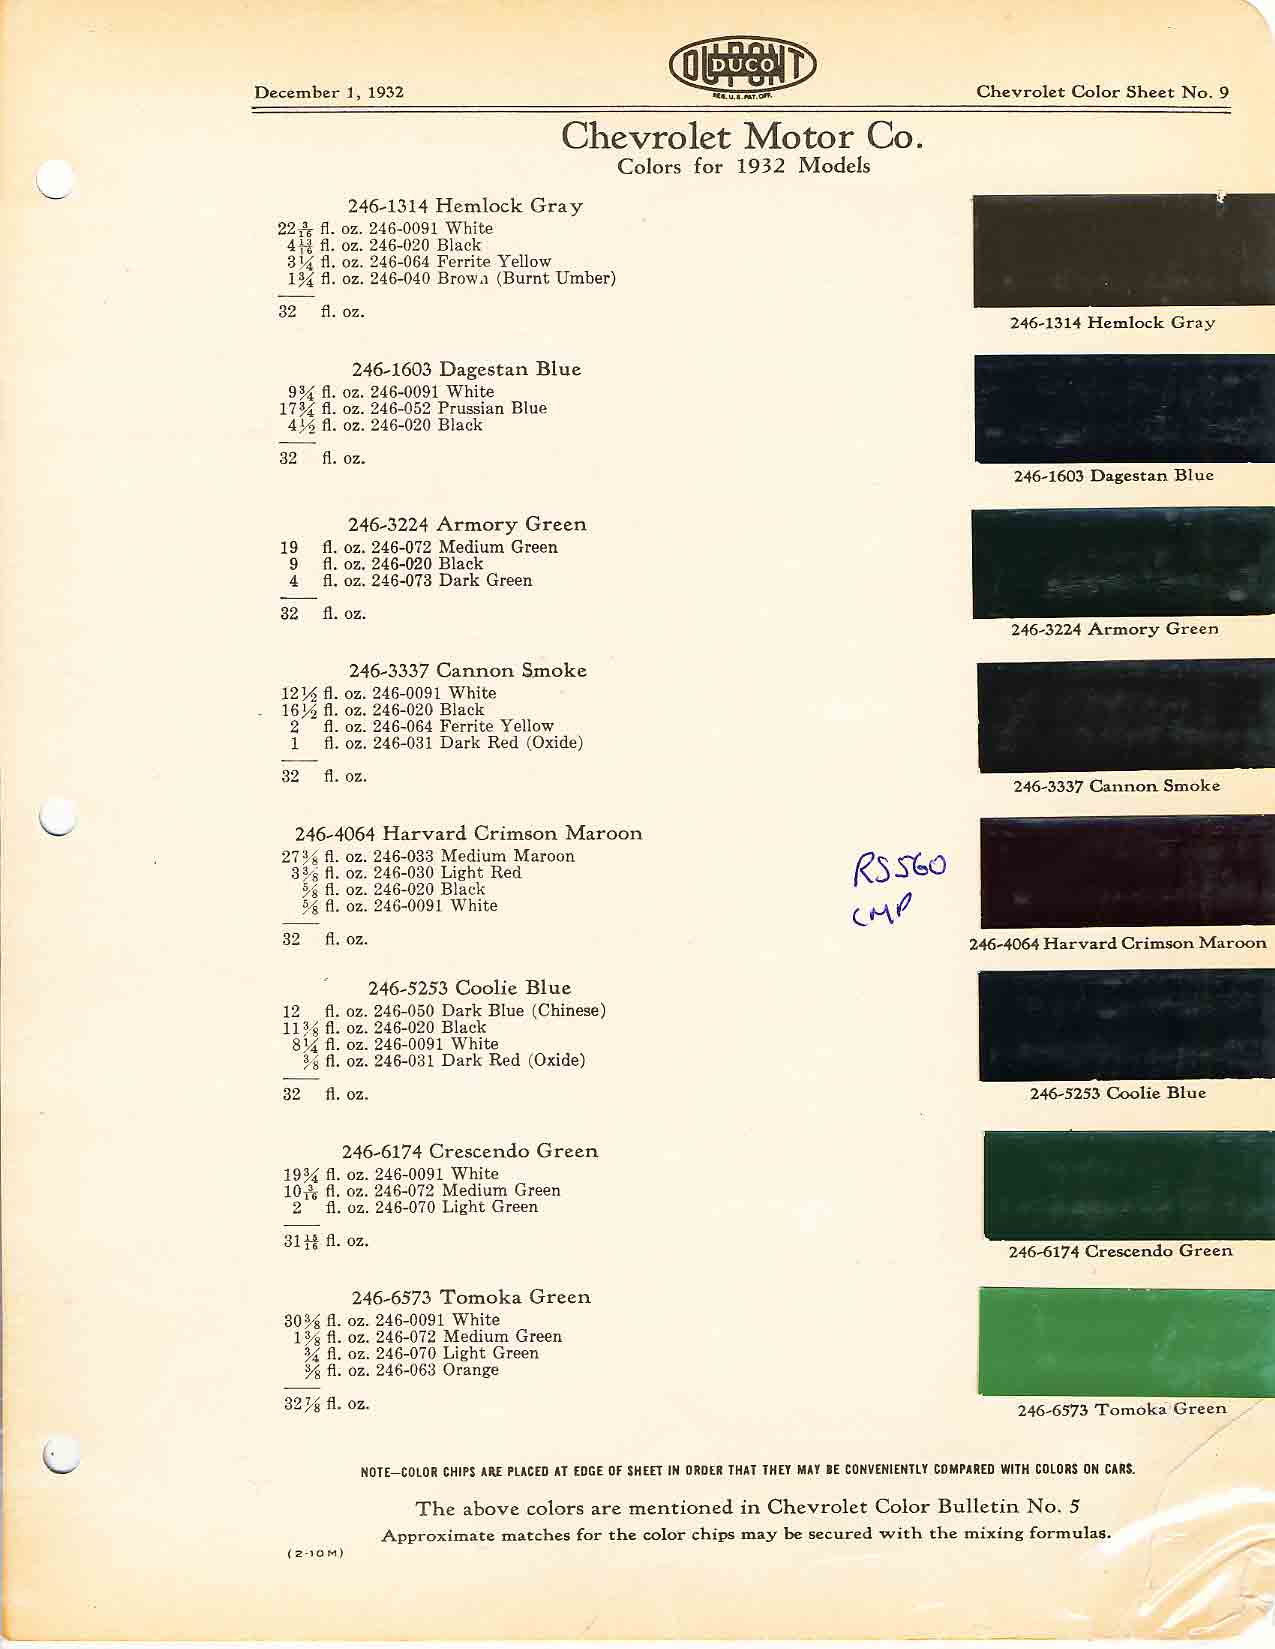 Colors and codes used on Chevrolet Vehicles in 1932